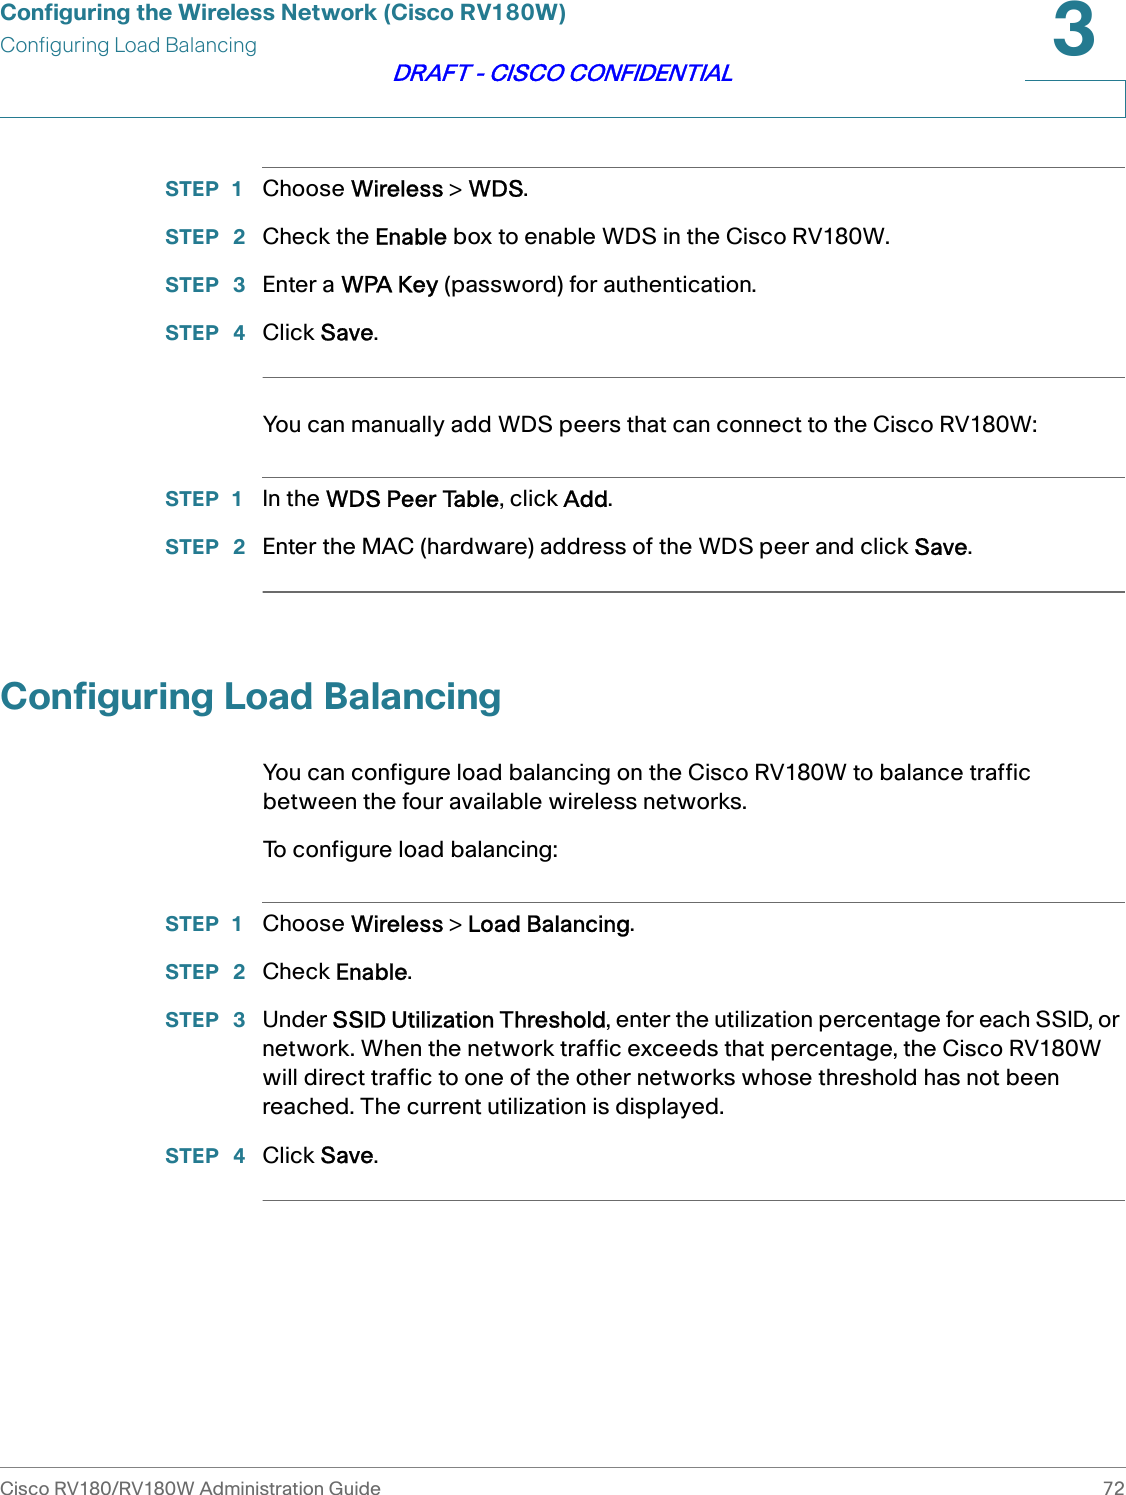 Configuring the Wireless Network (Cisco RV180W)Configuring Load BalancingCisco RV180/RV180W Administration Guide 723DRAFT - CISCO CONFIDENTIALSTEP 1 Choose Wireless &gt; WDS.STEP  2 Check the Enable box to enable WDS in the Cisco RV180W.STEP  3 Enter a WPA Key (password) for authentication.STEP  4 Click Save.You can manually add WDS peers that can connect to the Cisco RV180W:STEP 1 In the WDS Peer Table, click Add.STEP  2 Enter the MAC (hardware) address of the WDS peer and click Save.Configuring Load BalancingYou can configure load balancing on the Cisco RV180W to balance traffic between the four available wireless networks. To configure load balancing:STEP 1 Choose Wireless &gt; Load Balancing.STEP  2 Check Enable. STEP  3 Under SSID Utilization Threshold, enter the utilization percentage for each SSID, or network. When the network traffic exceeds that percentage, the Cisco RV180W will direct traffic to one of the other networks whose threshold has not been reached. The current utilization is displayed.STEP  4 Click Save.